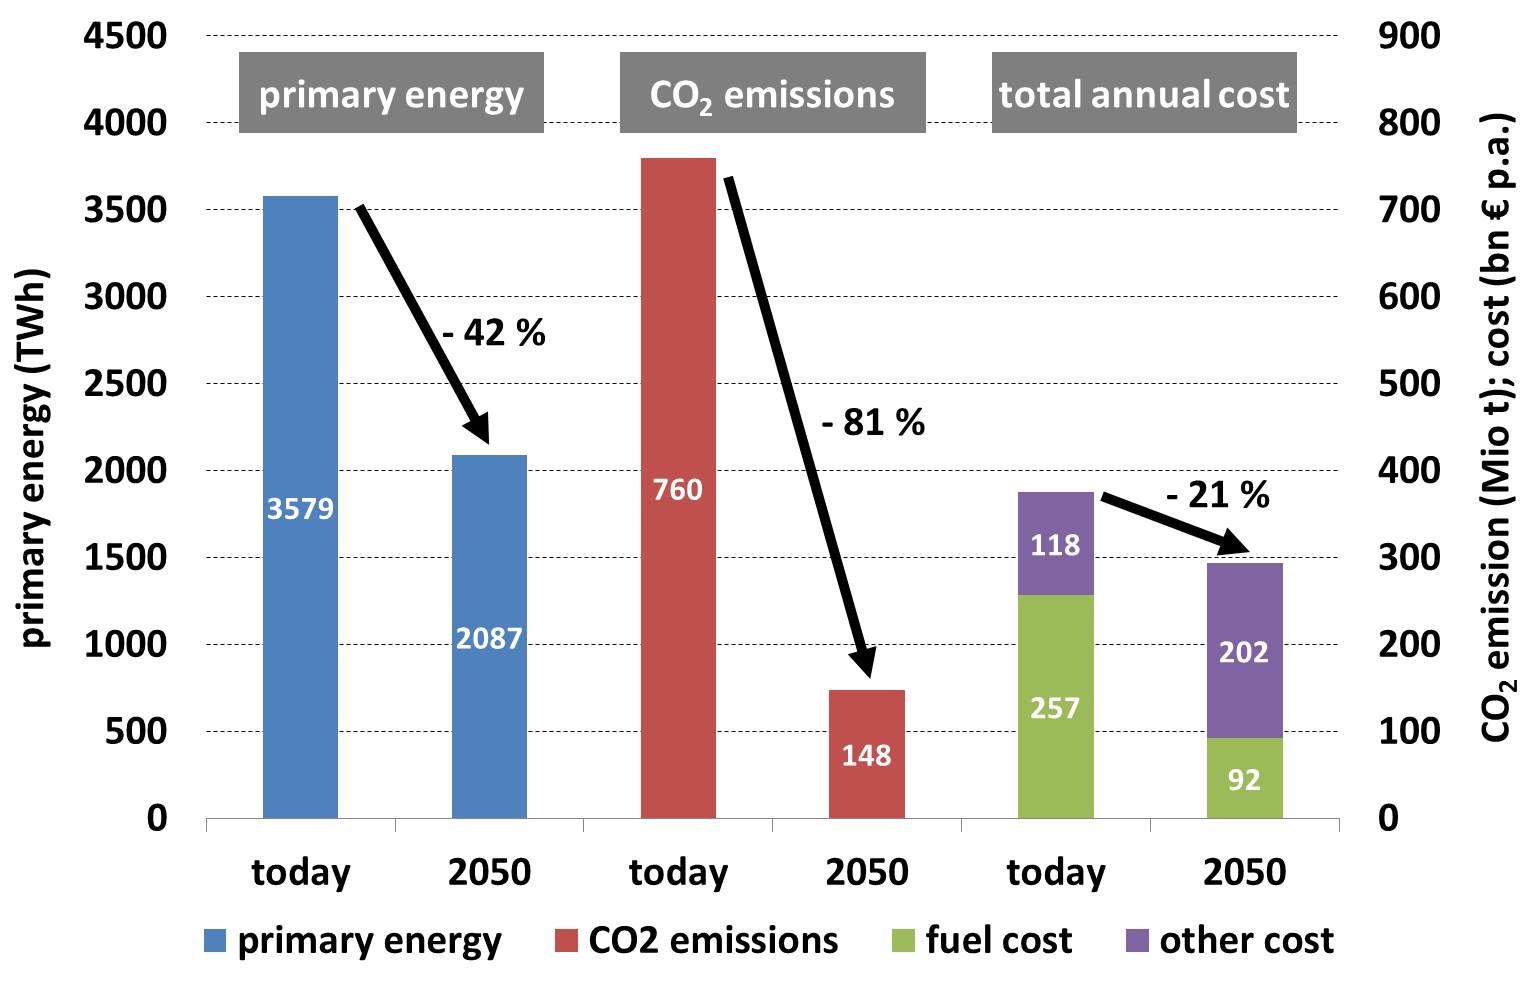 2050-system versus today cost after completed transformation Constant cost